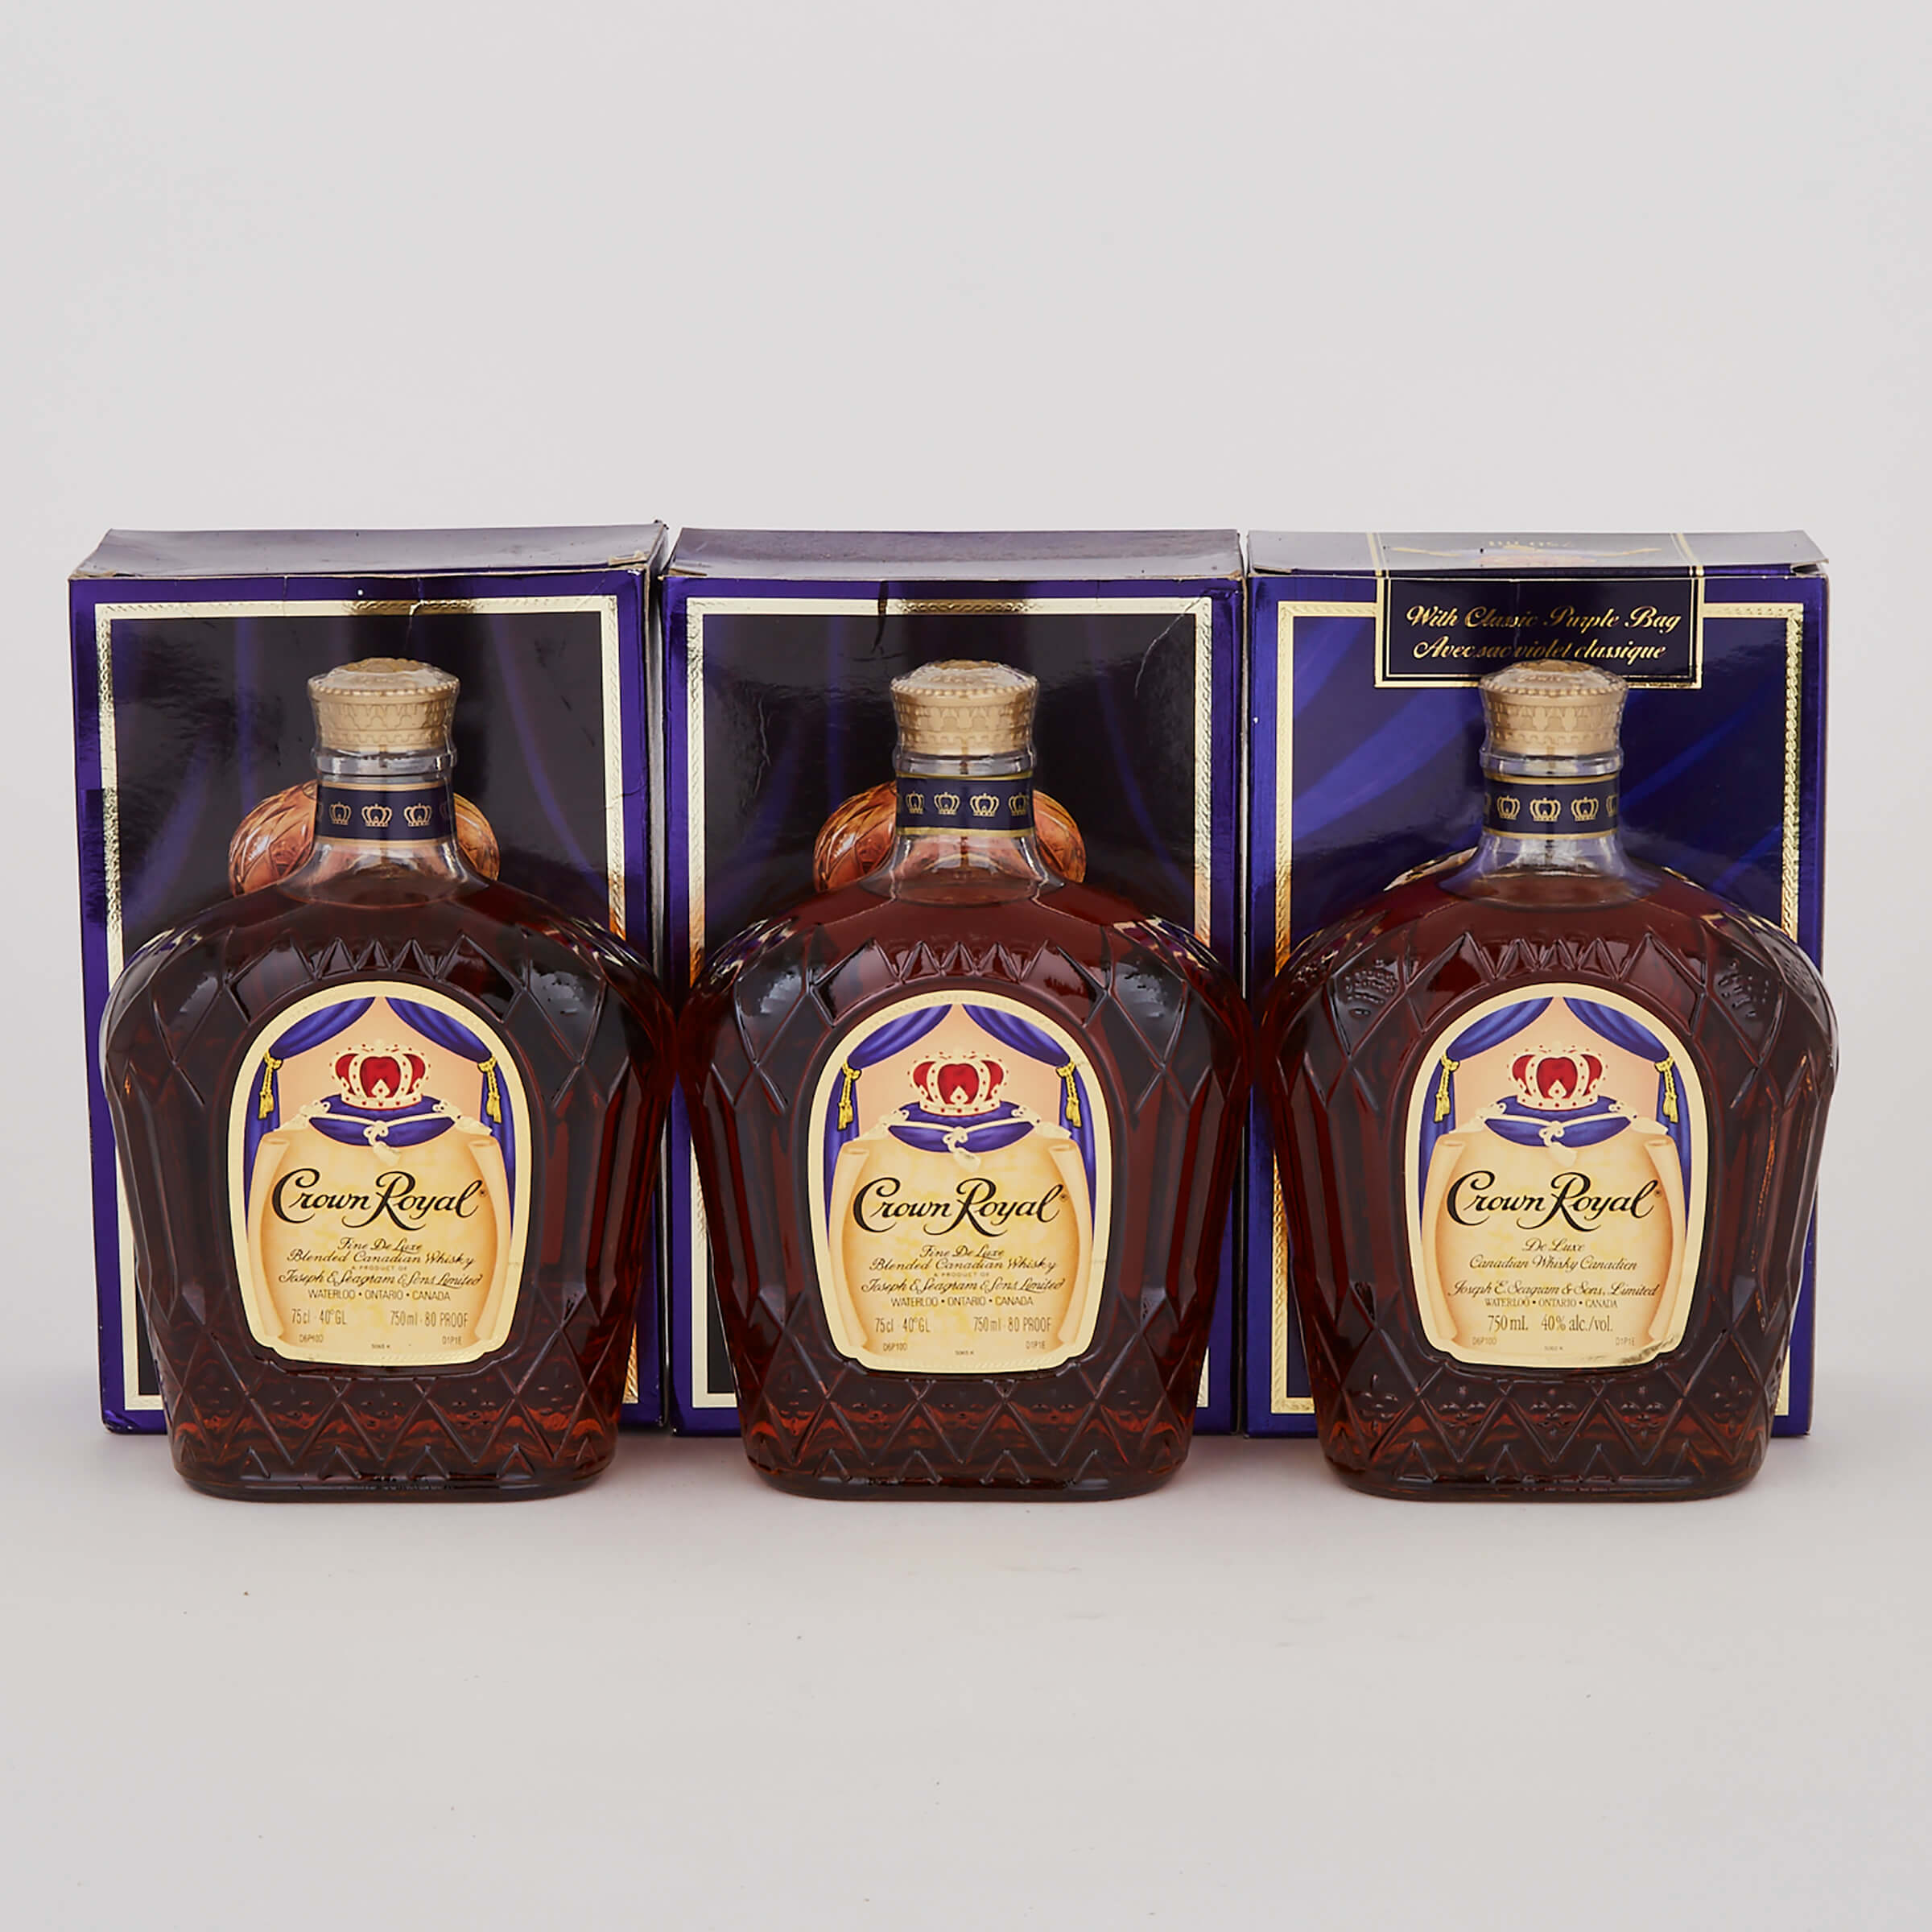 CROWN ROYAL CANADIAN WHISKY (NAS) (ONE 750 ML)
CROWN ROYAL DELUXE CANADIAN WHISKEY (NAS) (ONE 750 ML)
CROWN ROYAL DELUXE CANADIAN WHISKEY (NAS) (ONE 750 ML)